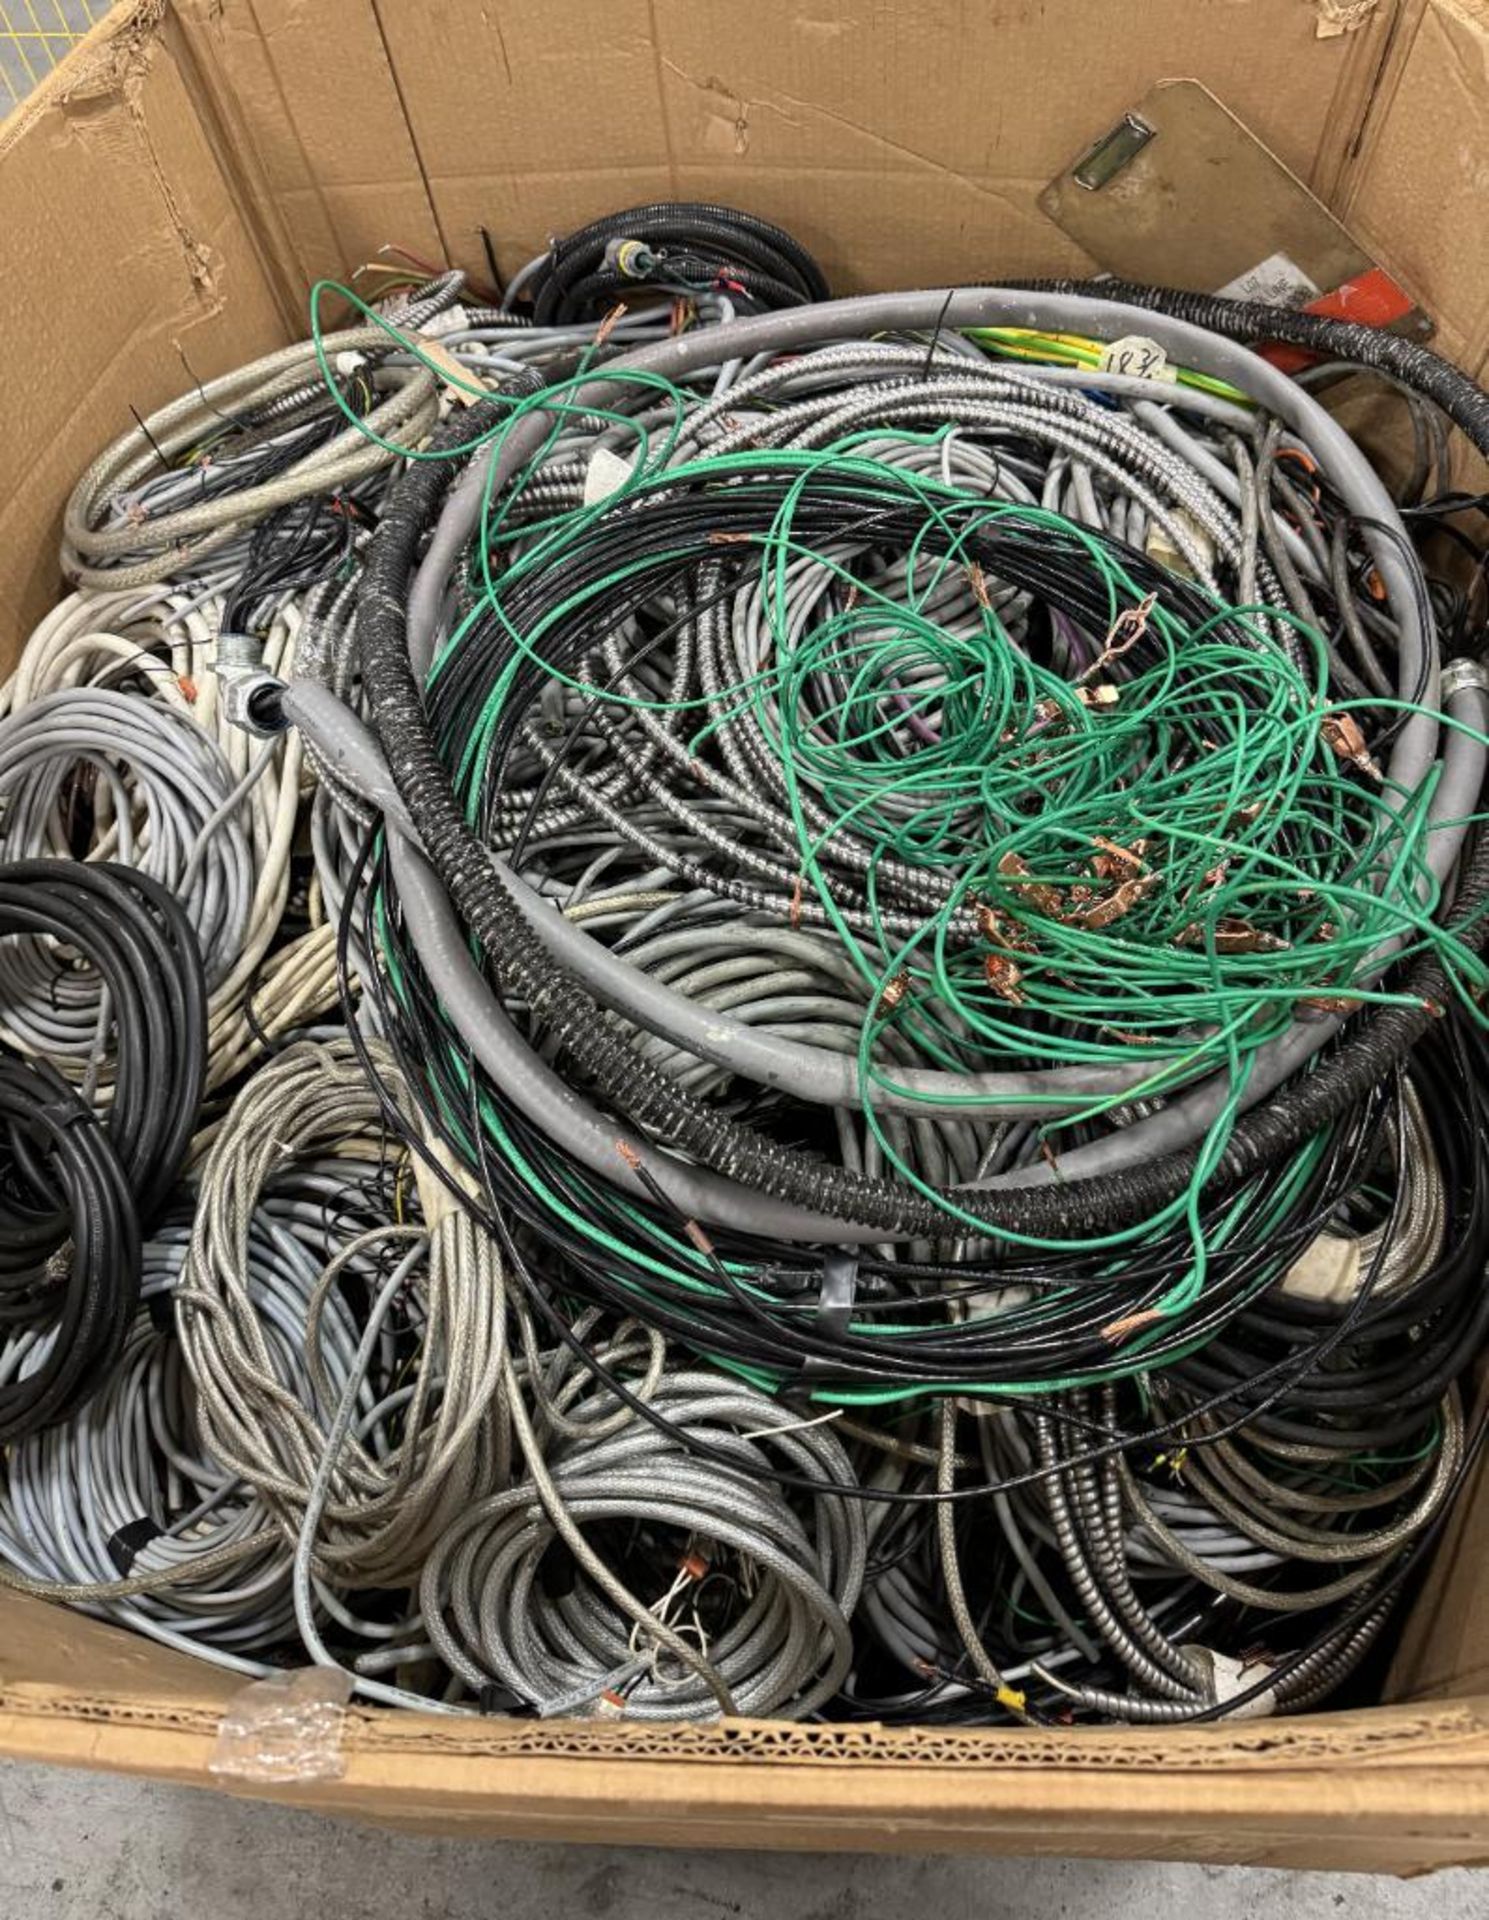 Lot Consisting Of: (1) Gaylord box of misc. wire, misc. extension cords, hardware, lights and (2) ho - Image 2 of 8